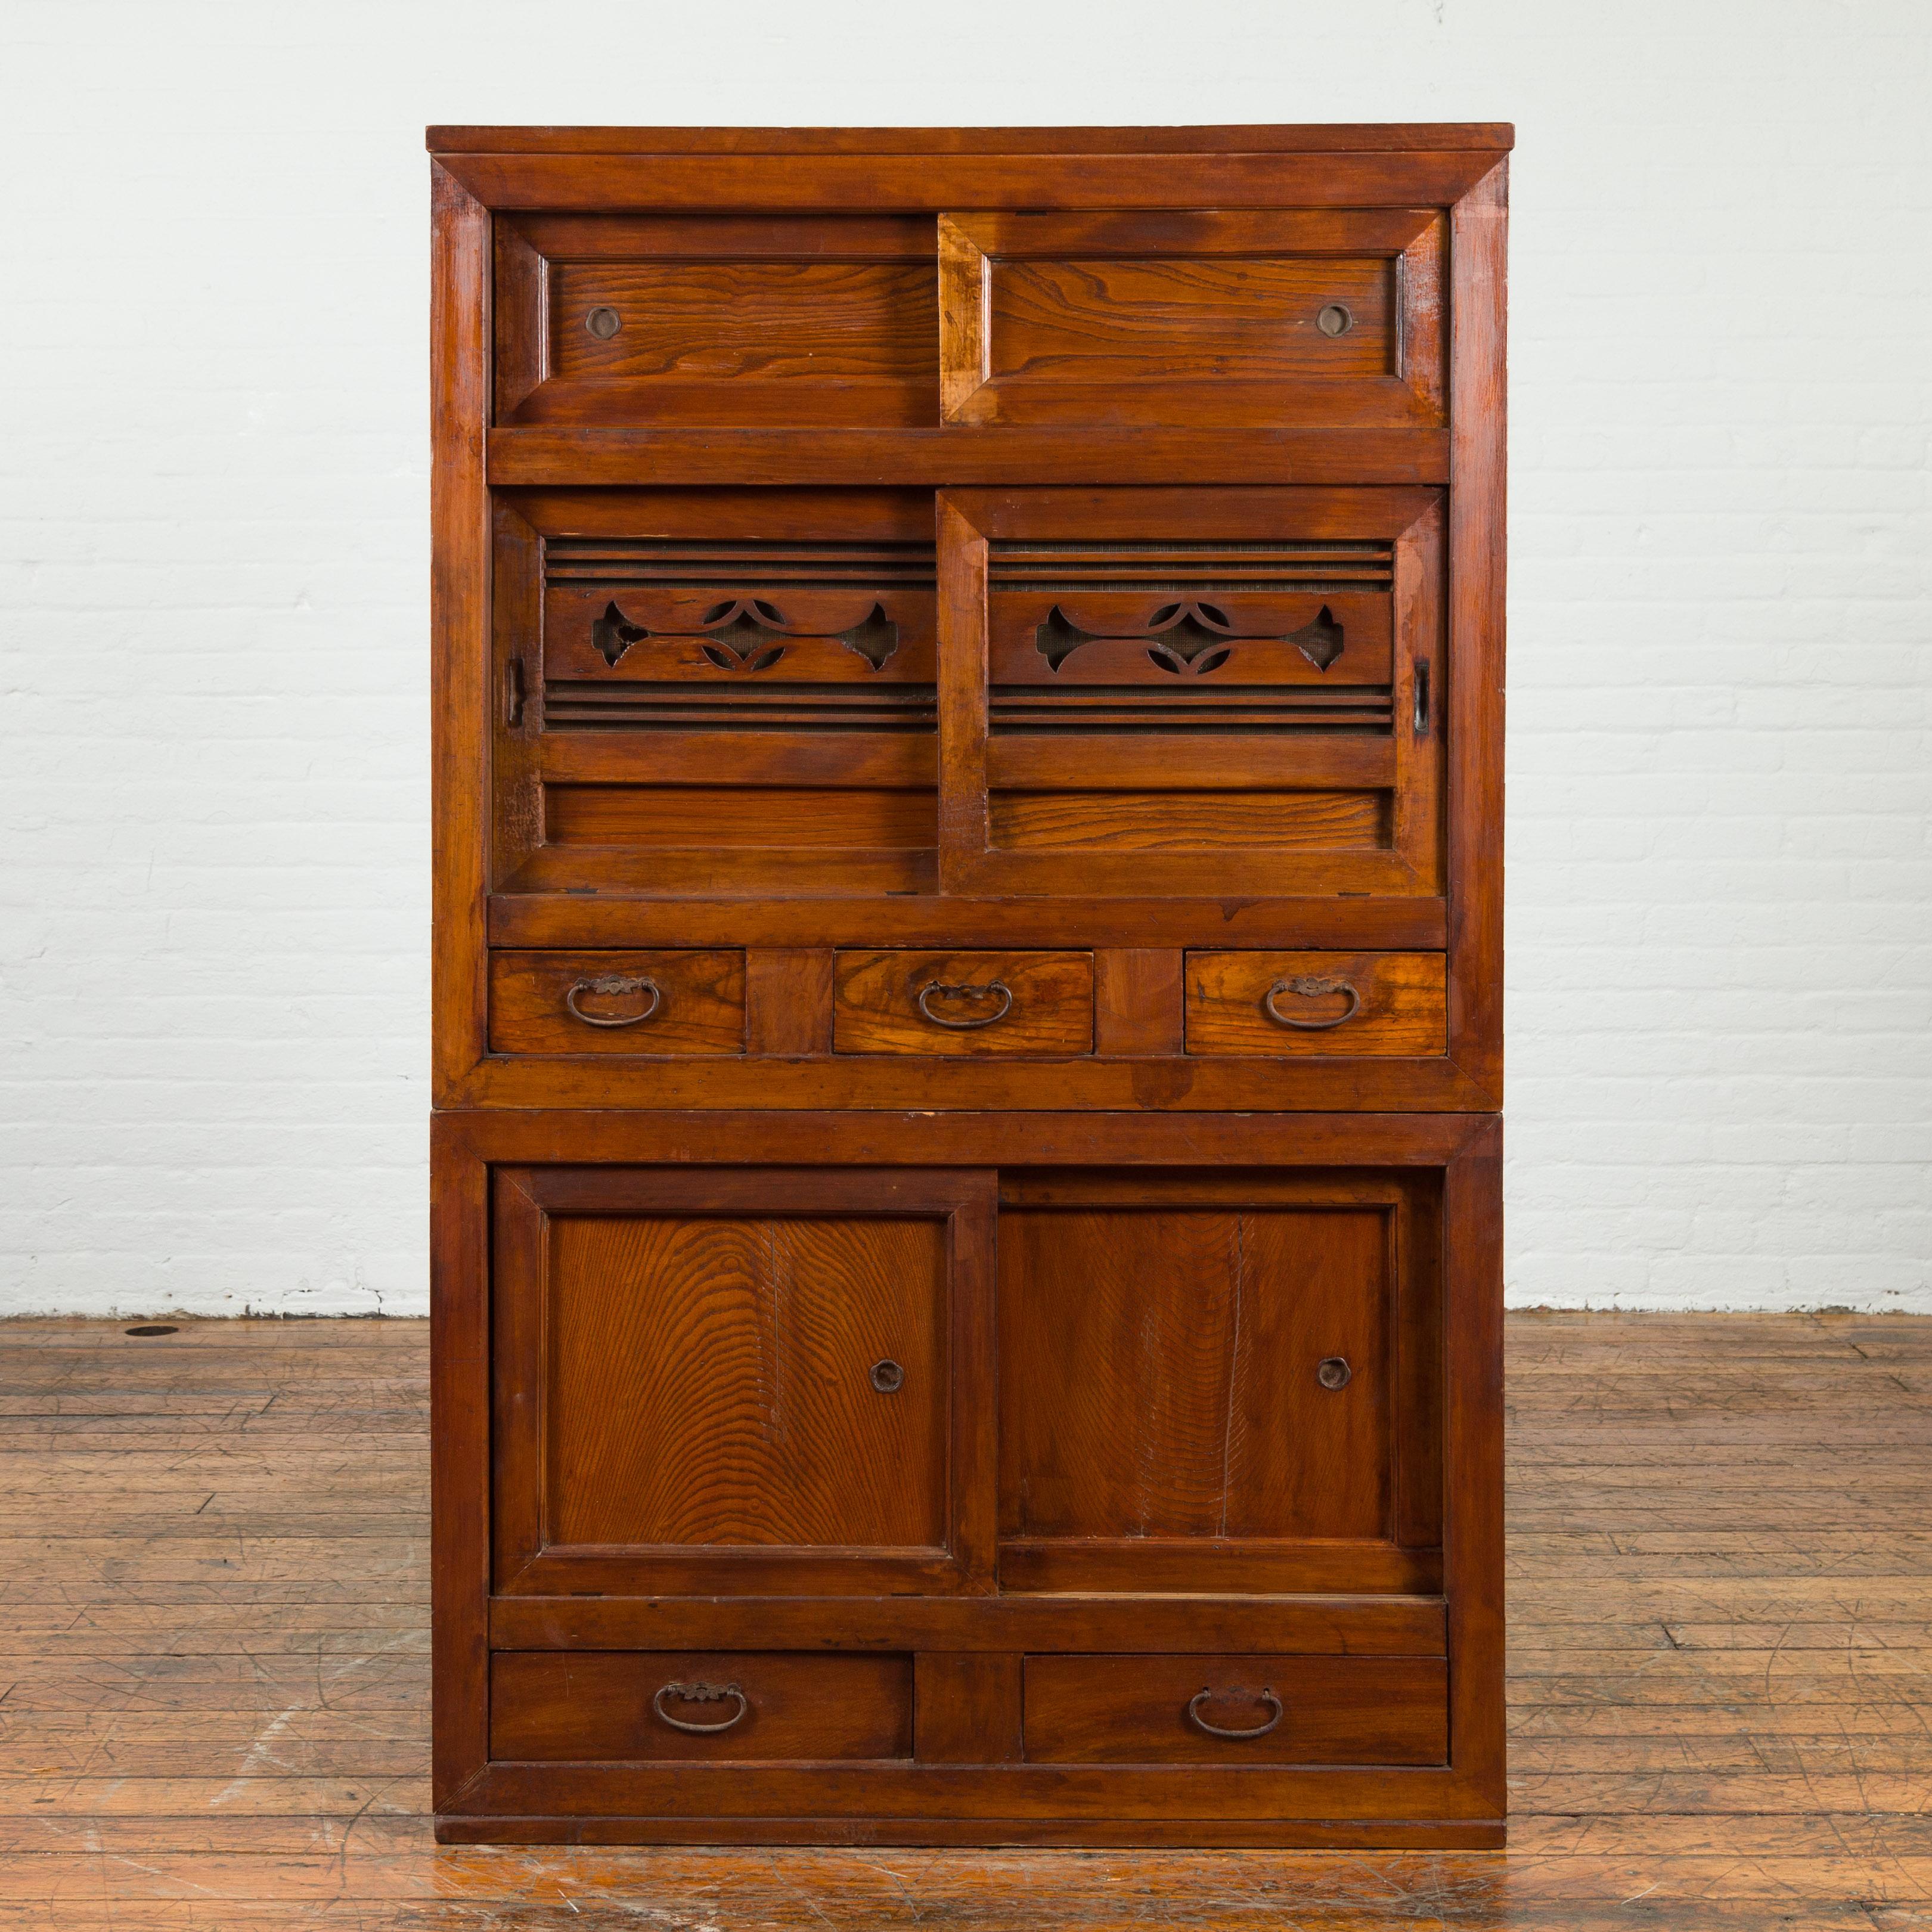 A Japanese Taisho period kitchen tansu cabinet from the early 20th century, with sliding doors. Created in Japan during the early years of the 20th century, this Japanese tansu cabinet features a linear silhouette perfectly complimented by a warm